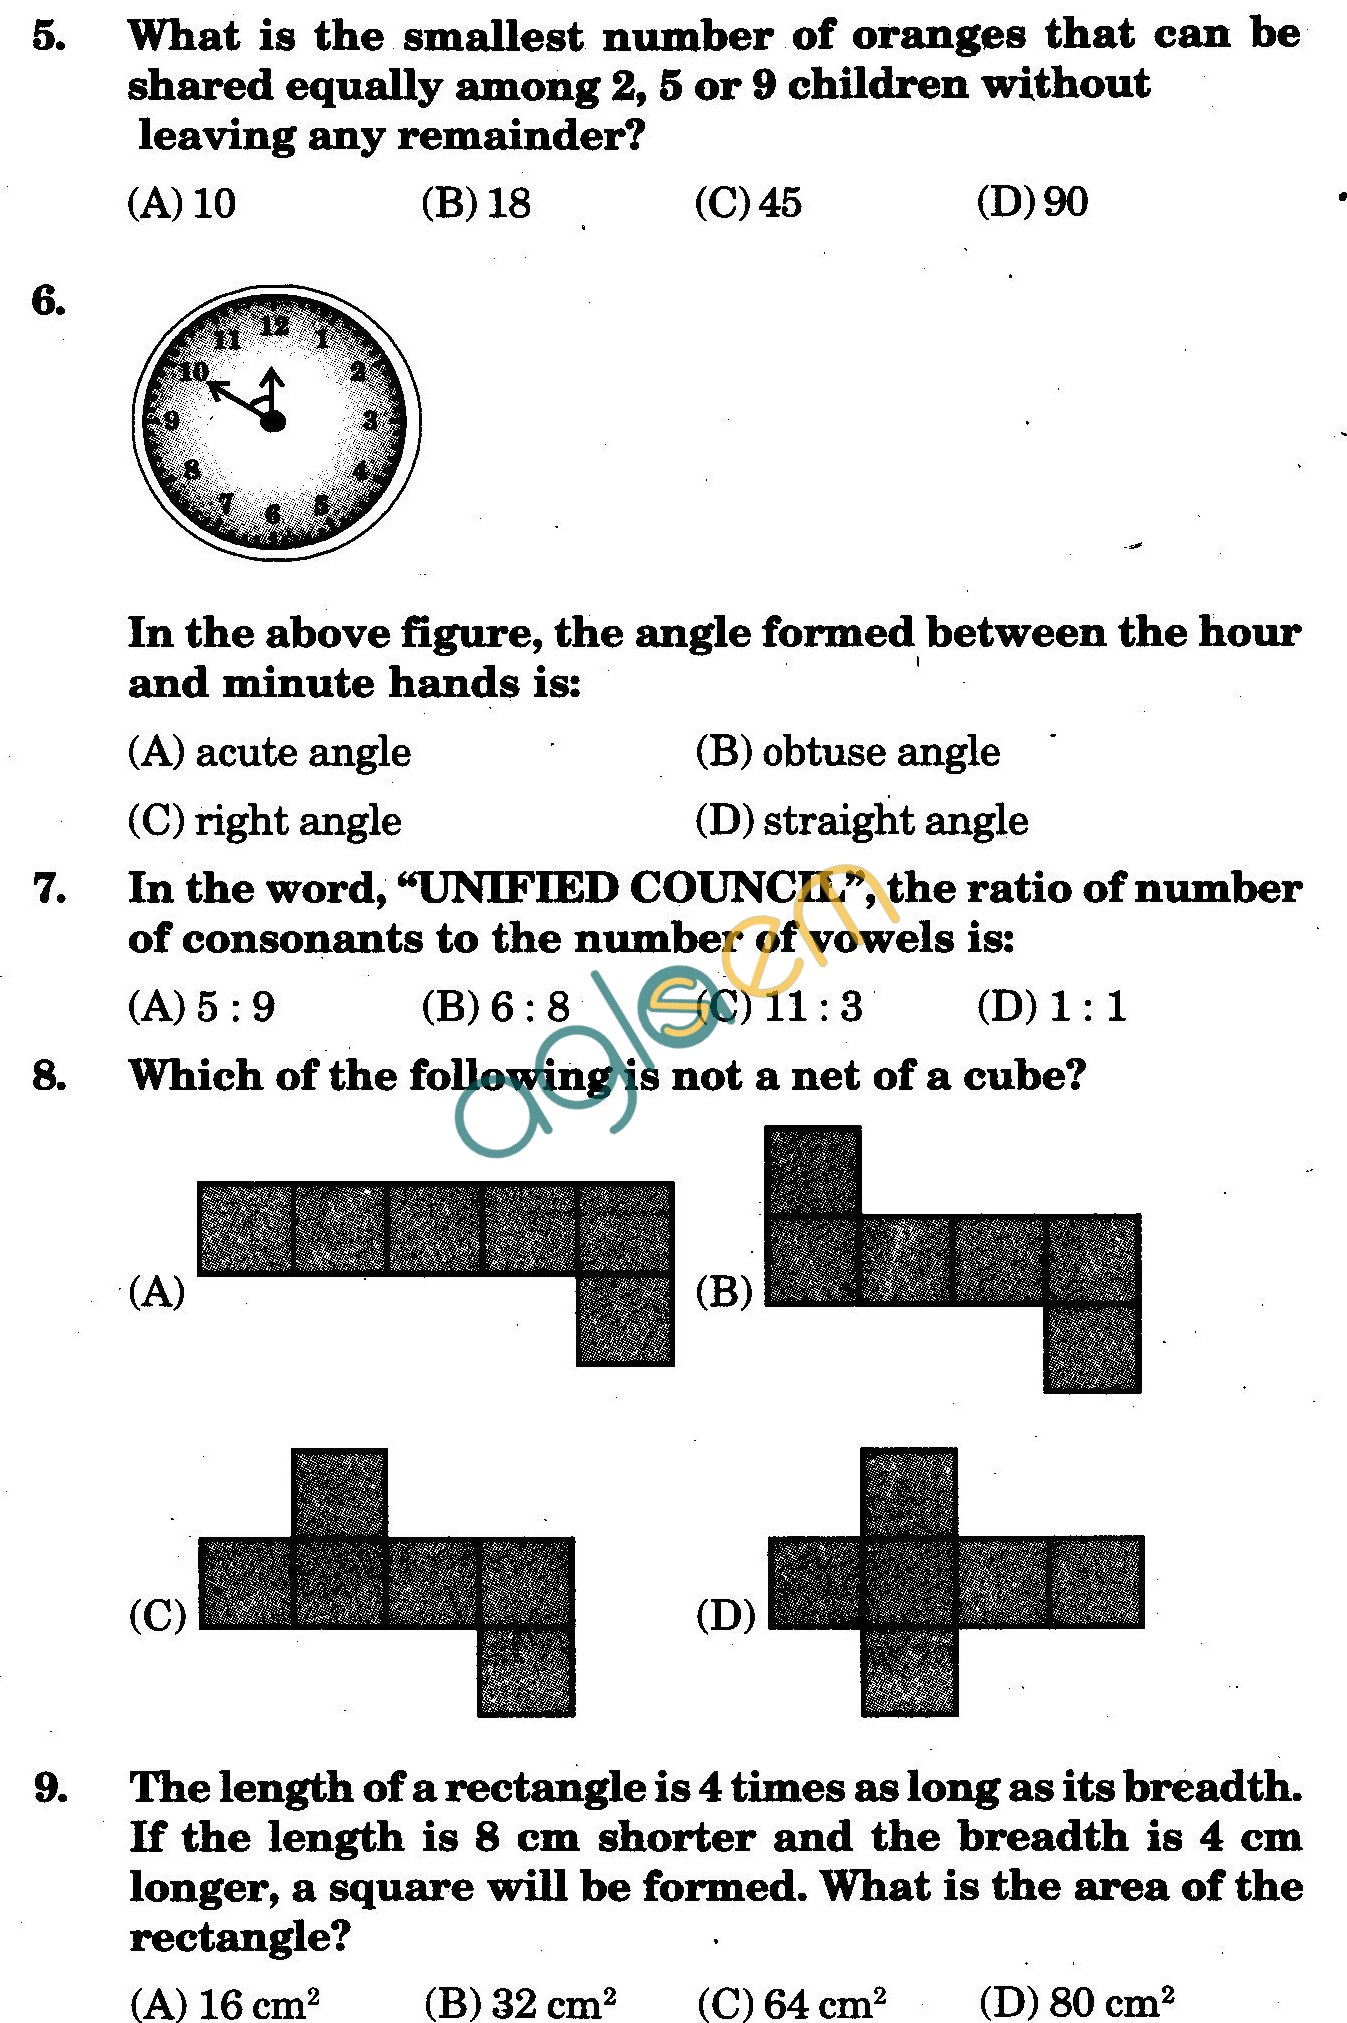 NSTSE 2010: Class VI Question Paper with Answers - Mathematics